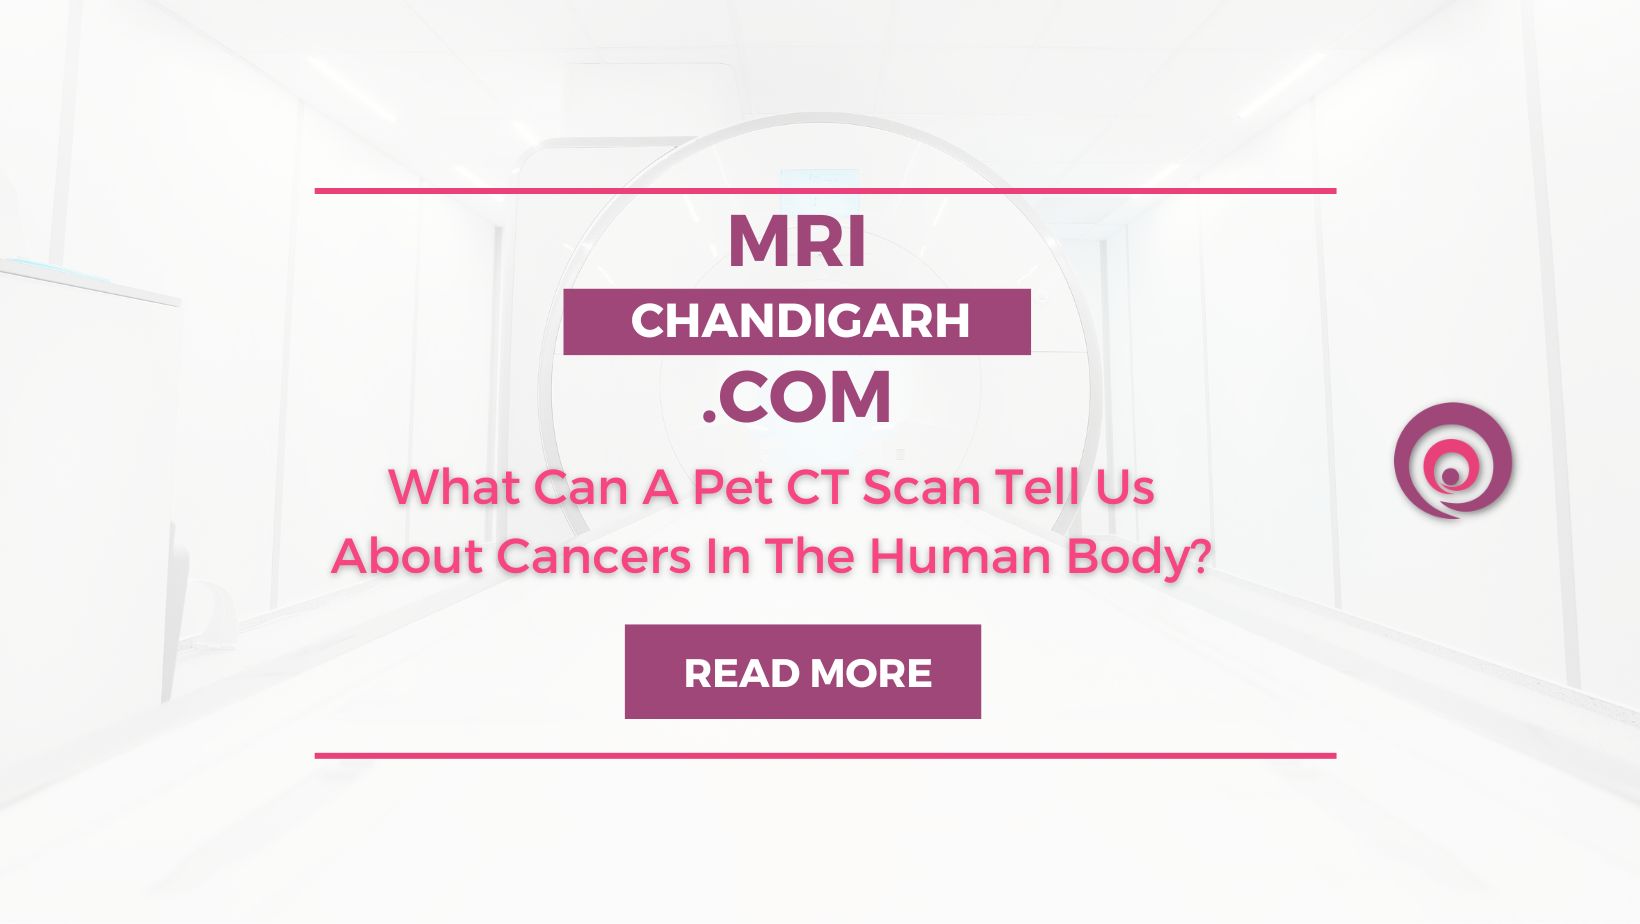 What Can A Pet CT Scan Tell Us About Cancers In The Human Body?